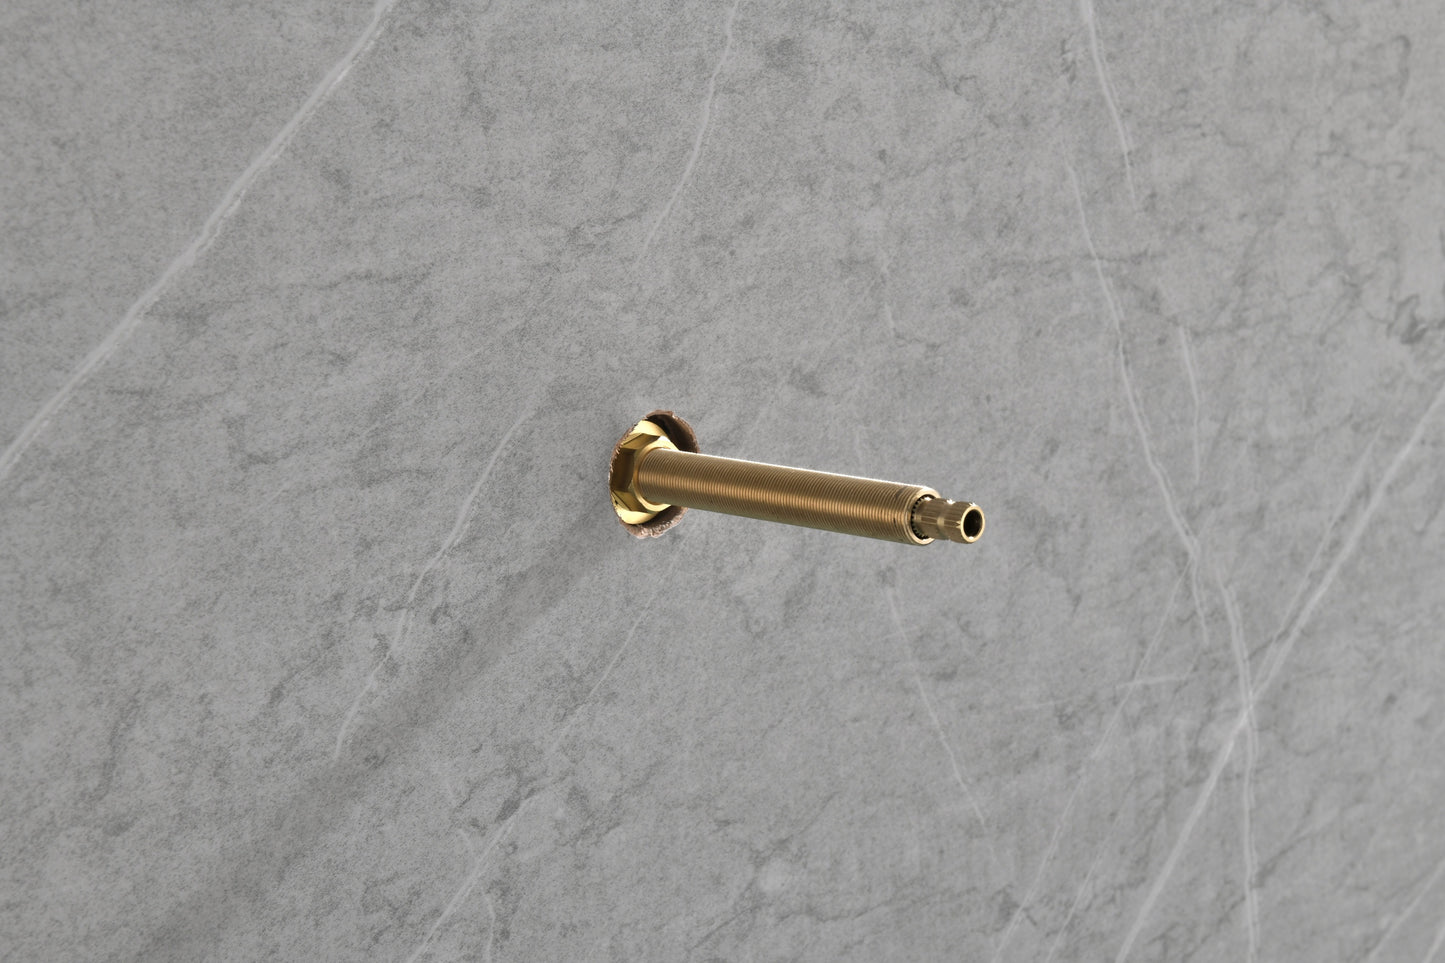 Master Shower Volume Control
Adjustable brass handle valve body, 1 piece each on the left and right